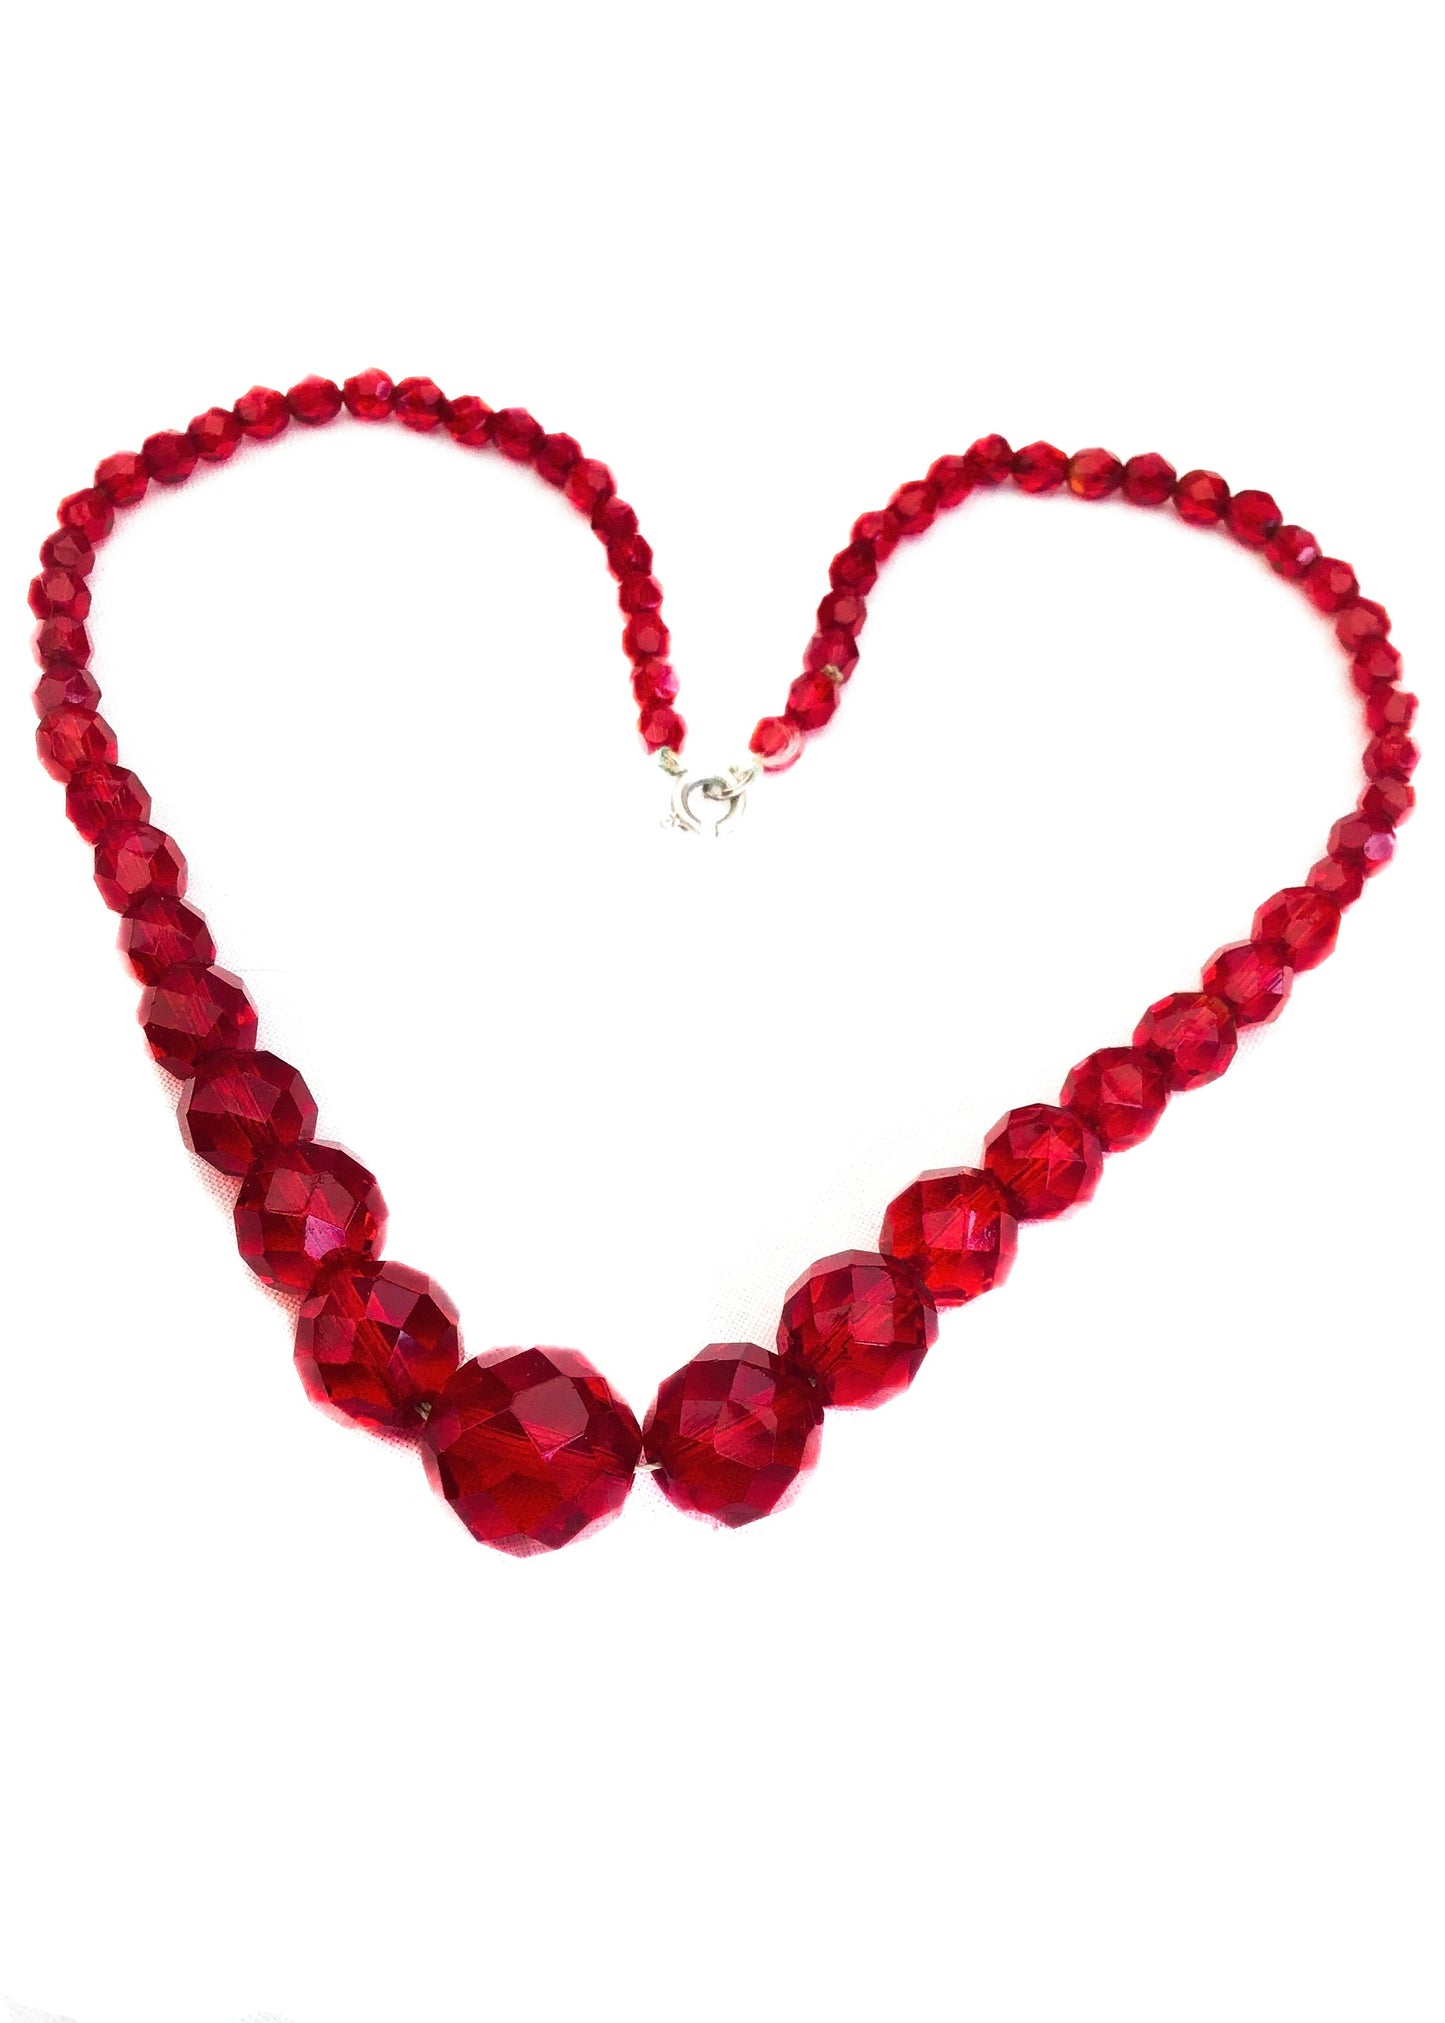 Vintage Ruby Red Faceted Czech Glass Bead Necklace